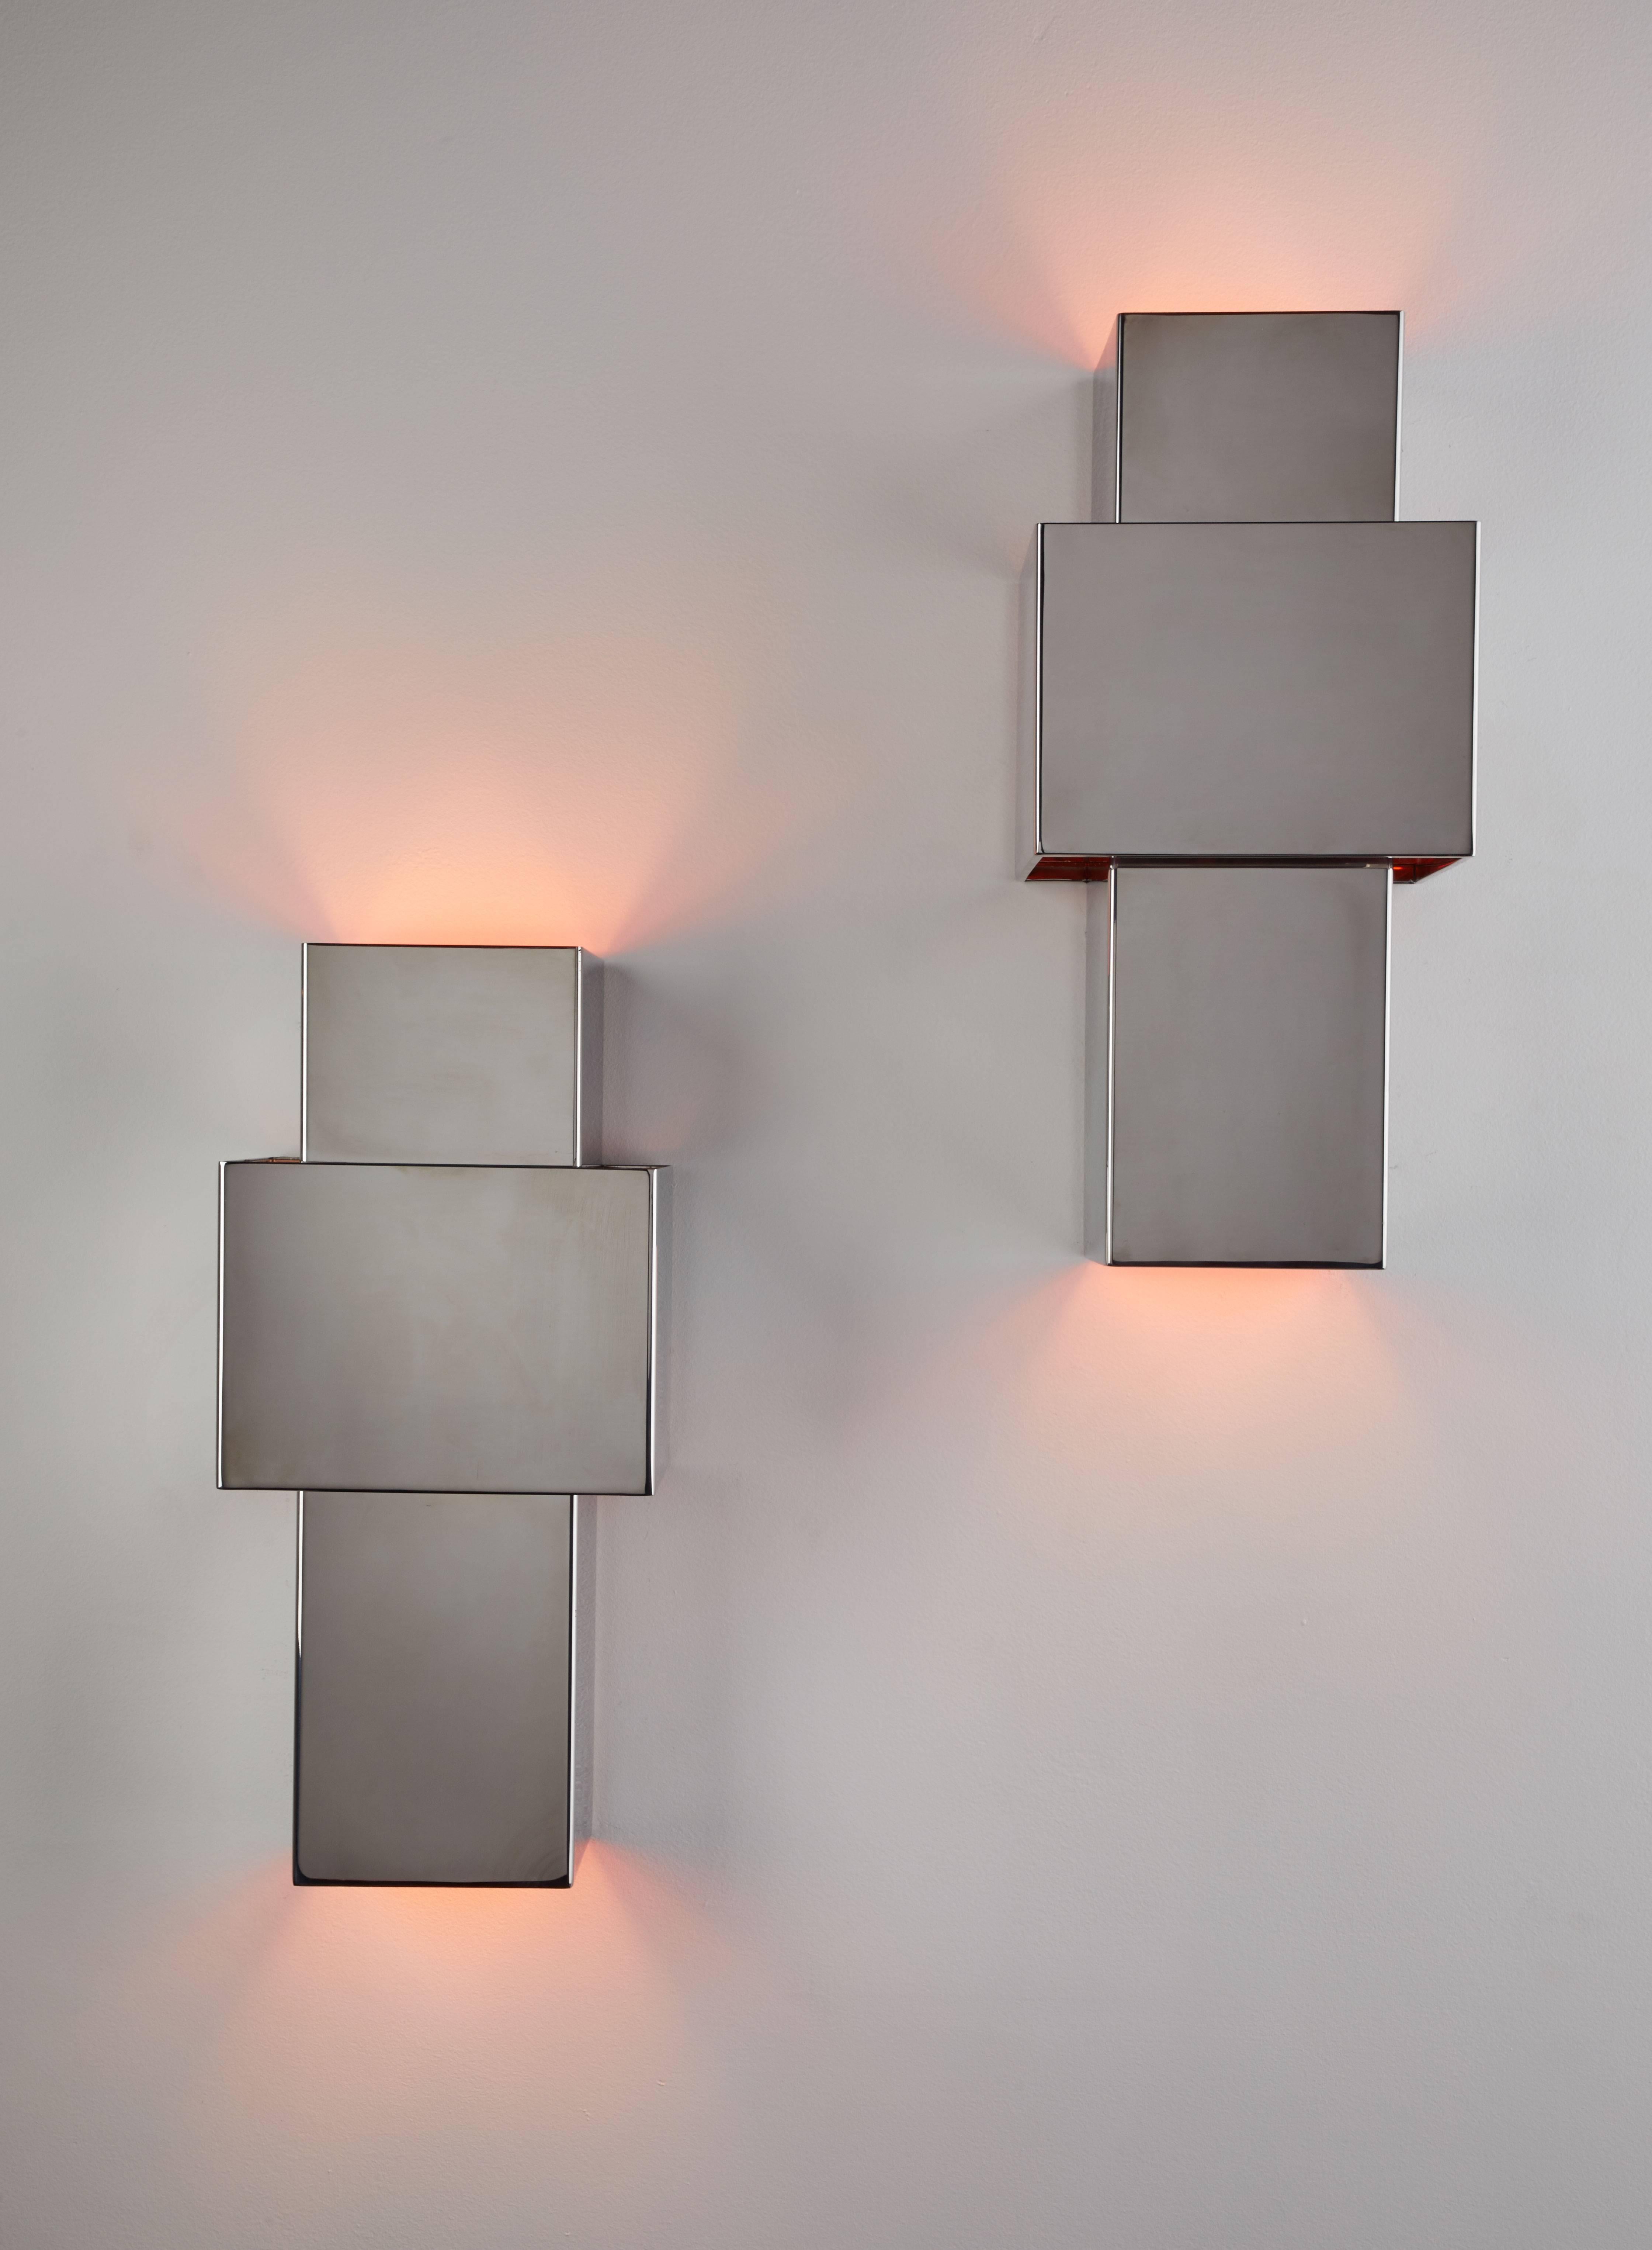 Pair of Love sconces designed by Willy Rizzo in Italy, circa 1970s. Chrome-plated stainless steel with copper exterior. Wired for US junction boxes. Each sconce takes one E14 100w maximum bulb.